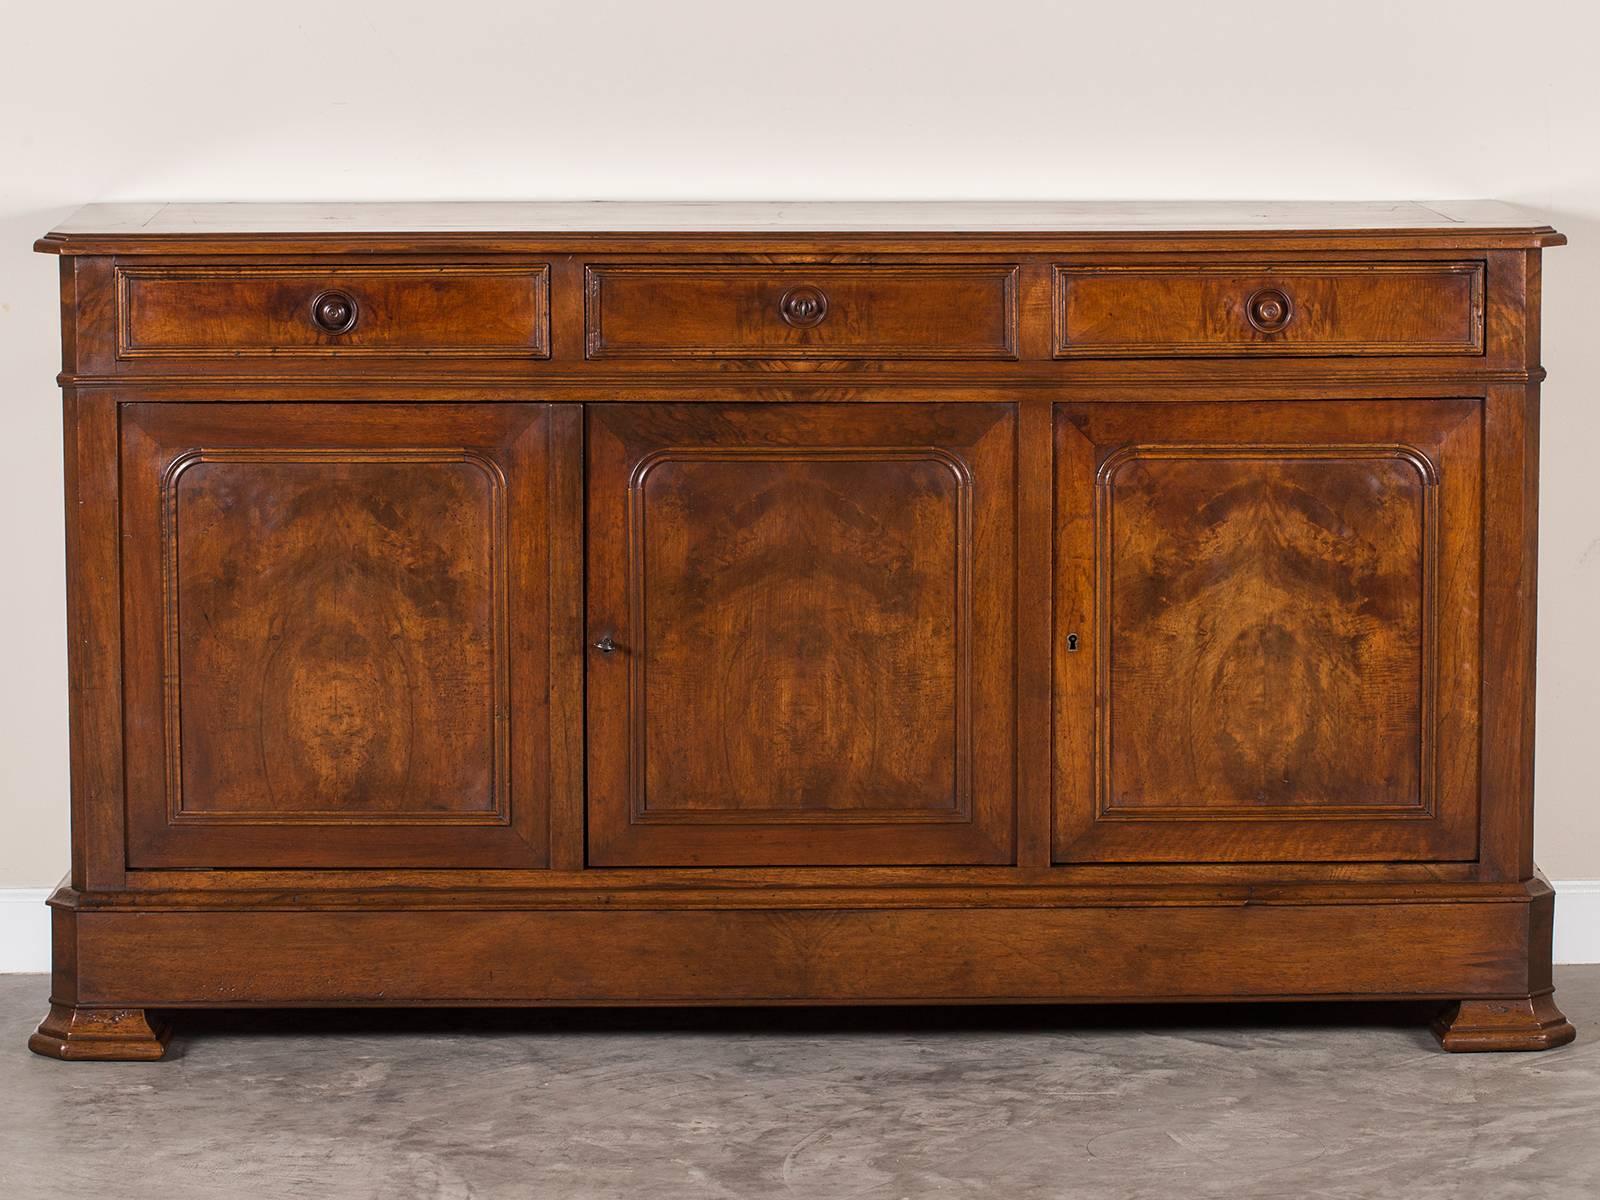 Be the first to see our new arrivals directly through 1stdibs! Please click follow dealer below. 

The handsome architectural lines of this antique French Louis Philippe enfilade buffet credenza, circa 1870 has an impressive appearance. Notice how